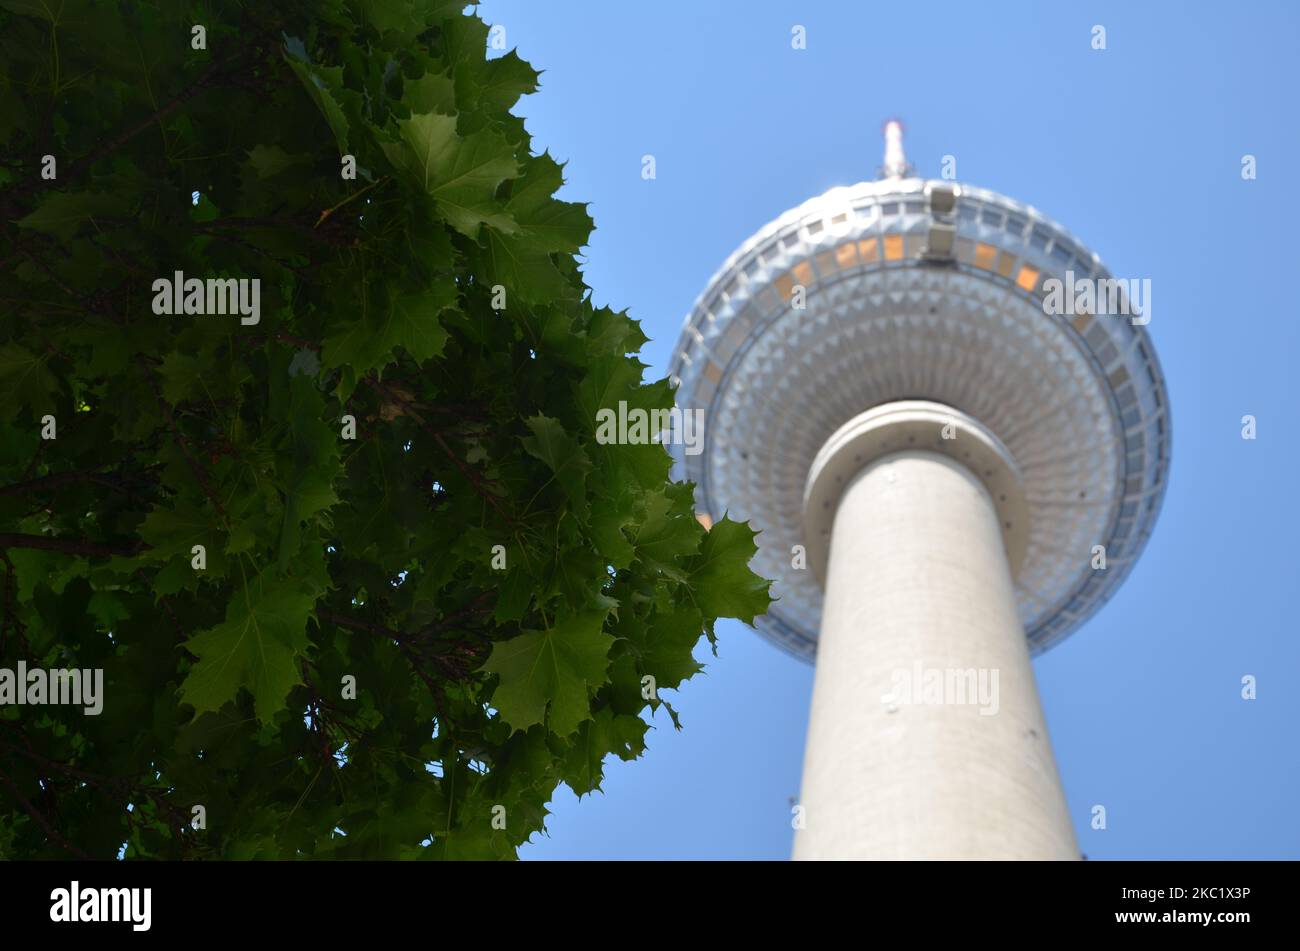 view from under a tree up to the big television tower in Berlin Stock Photo